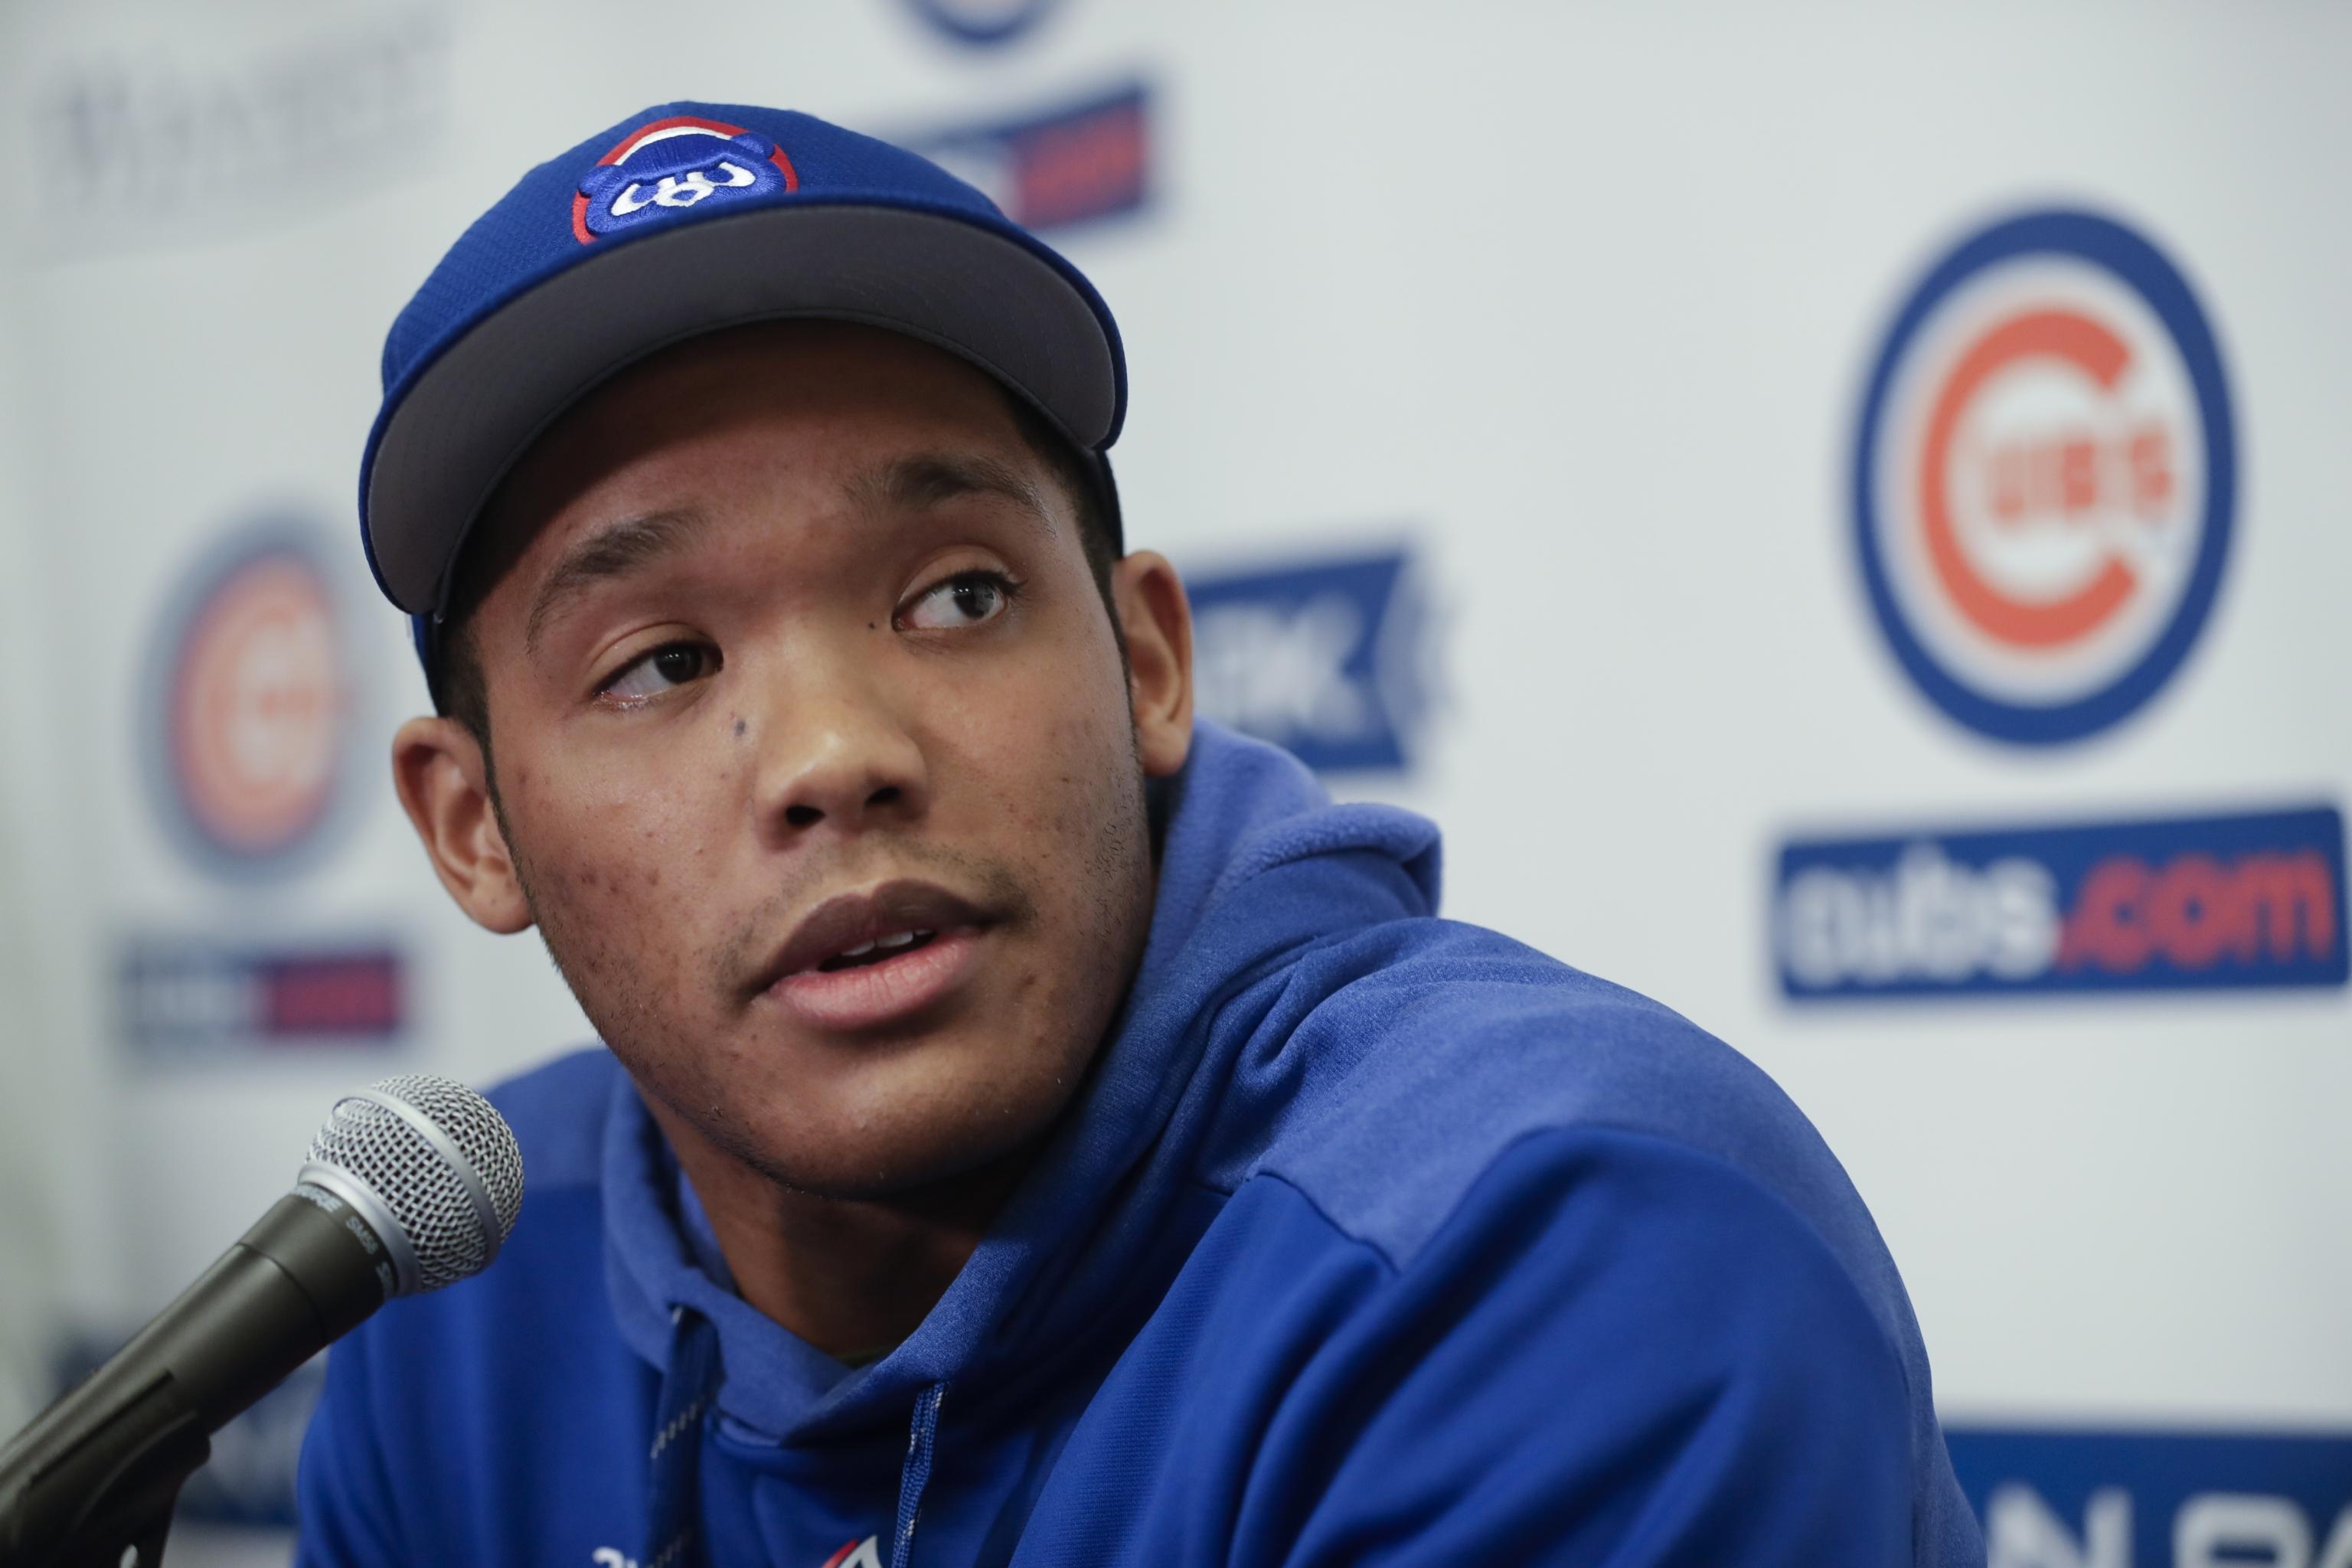 Addison Russell's ex-wife Melisa comes forward with details about